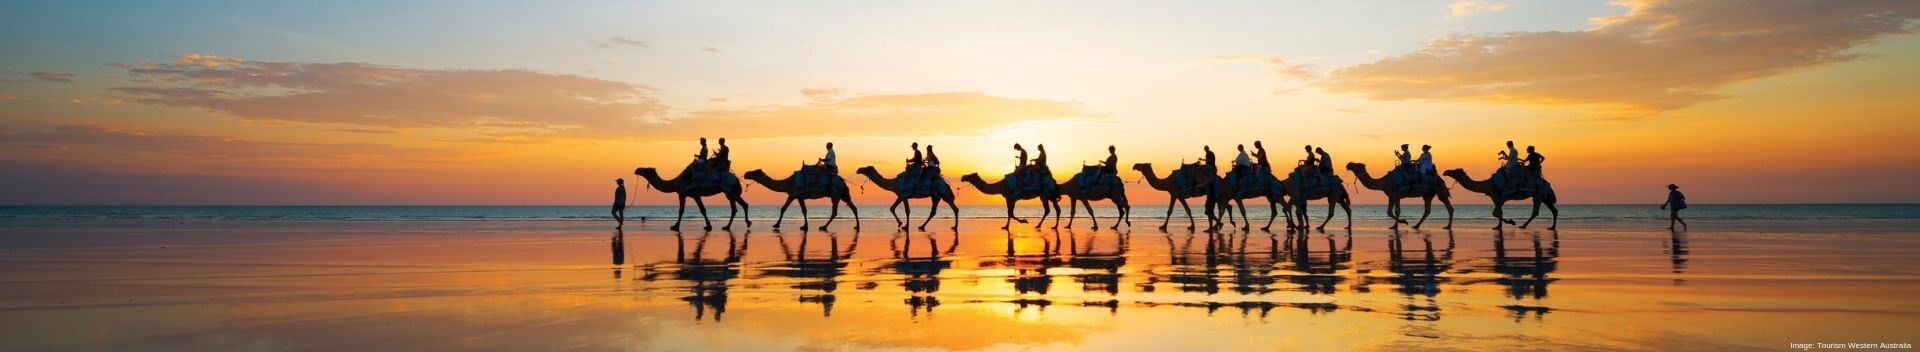 Riding Camels on Cable Beach at Sunset